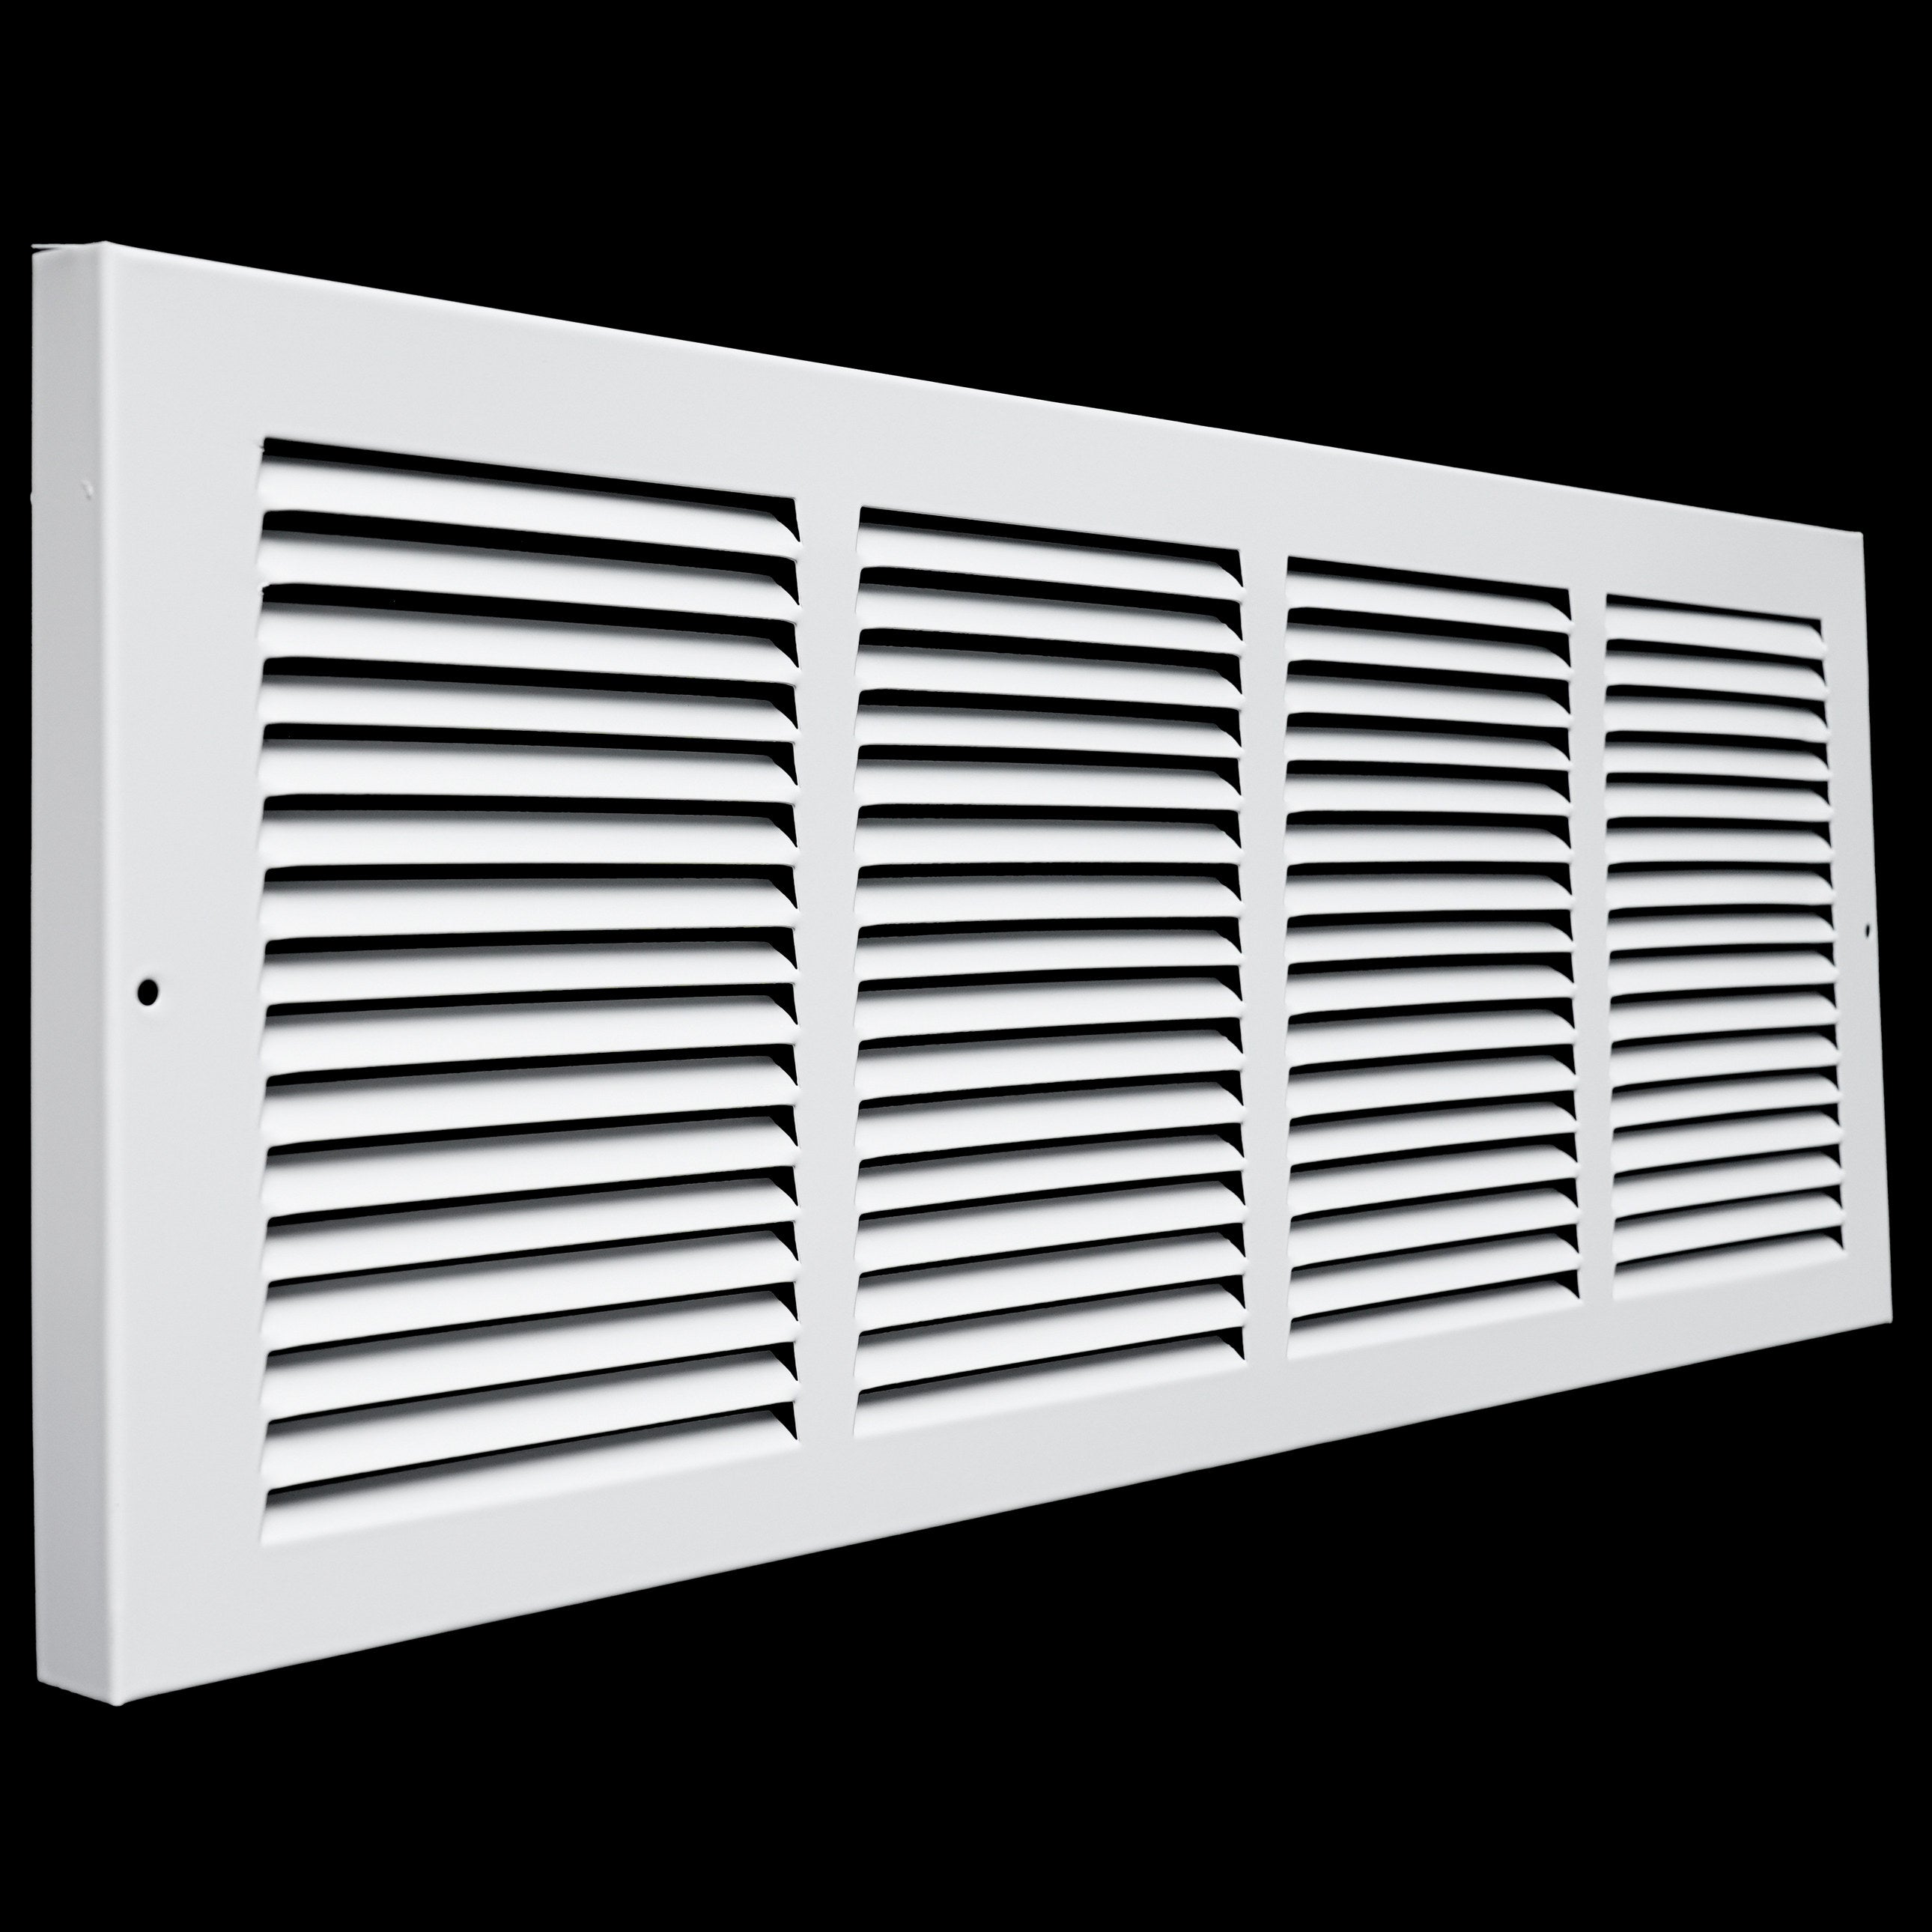 airgrilles 24"w x 8"h baseboard return air grille   vent cover grill   7/8" margin turnback to fit baseboard   white   outer dimensions: 25.75"w x 9.75"h for 24x8 duct opening hnd-bra-wh-24x8  - 1